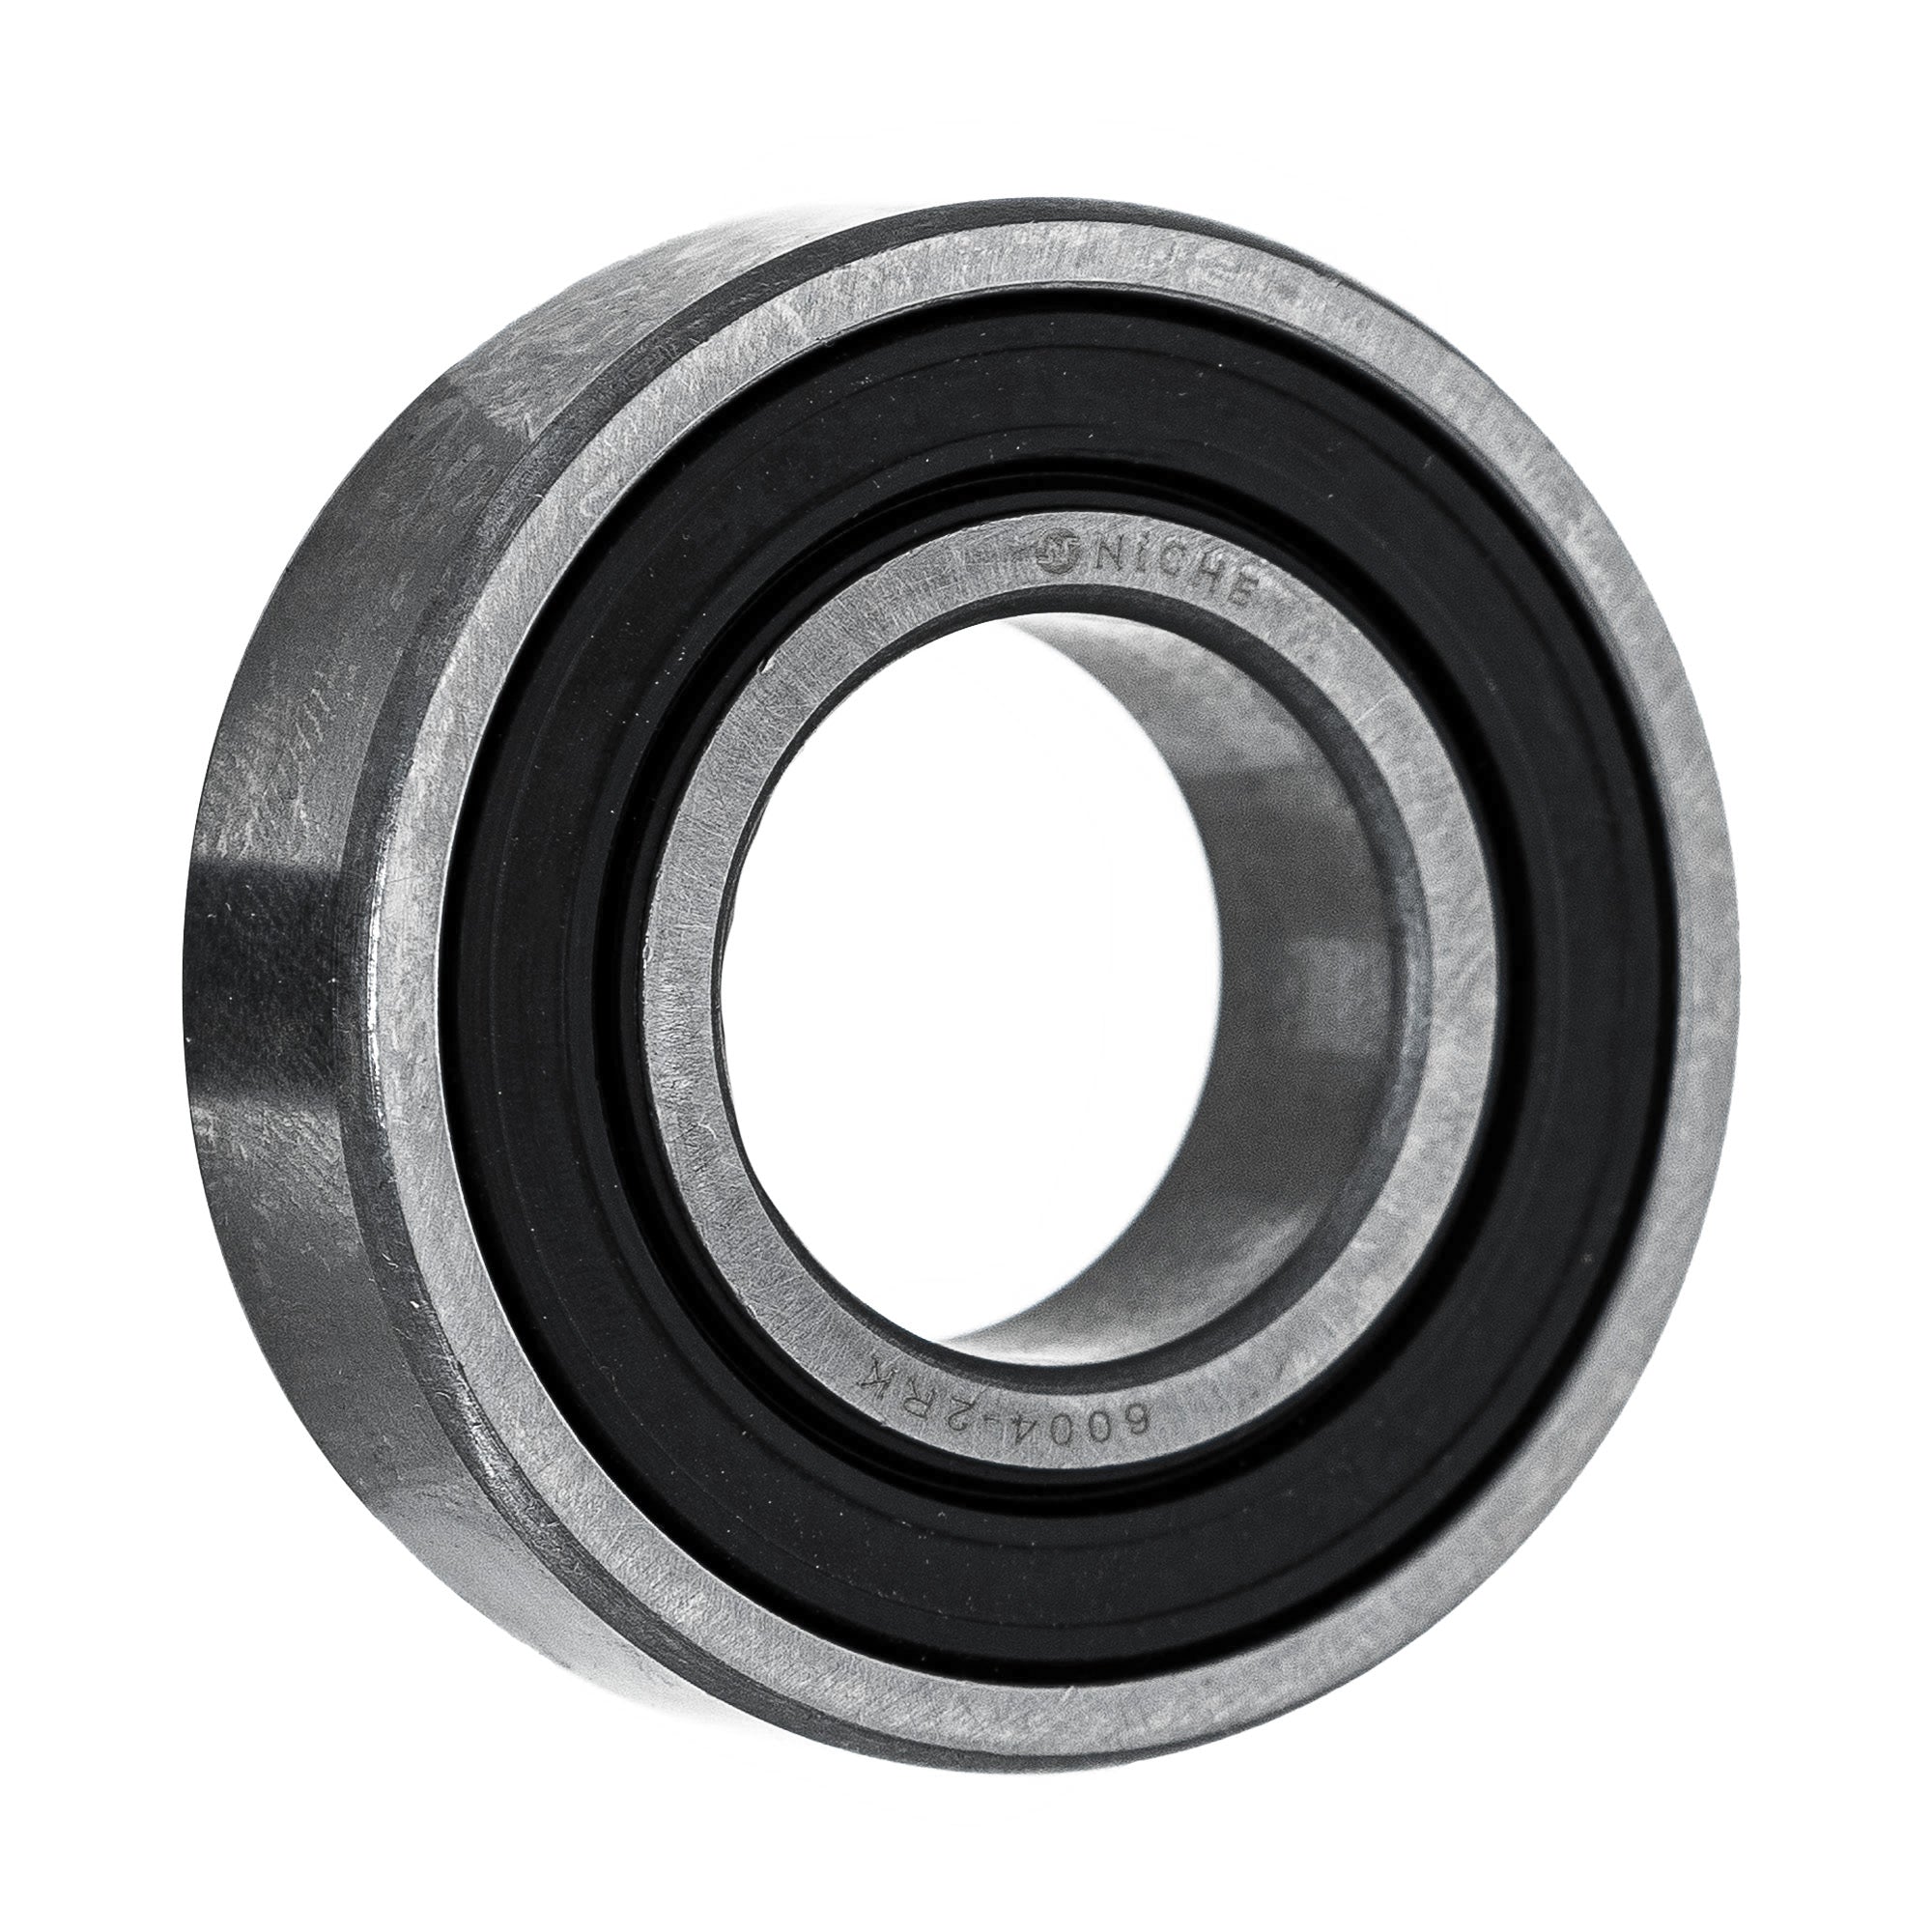 NICHE MK1008709 Wheel Bearing Seal Kit for zOTHER YZ400F YZ250